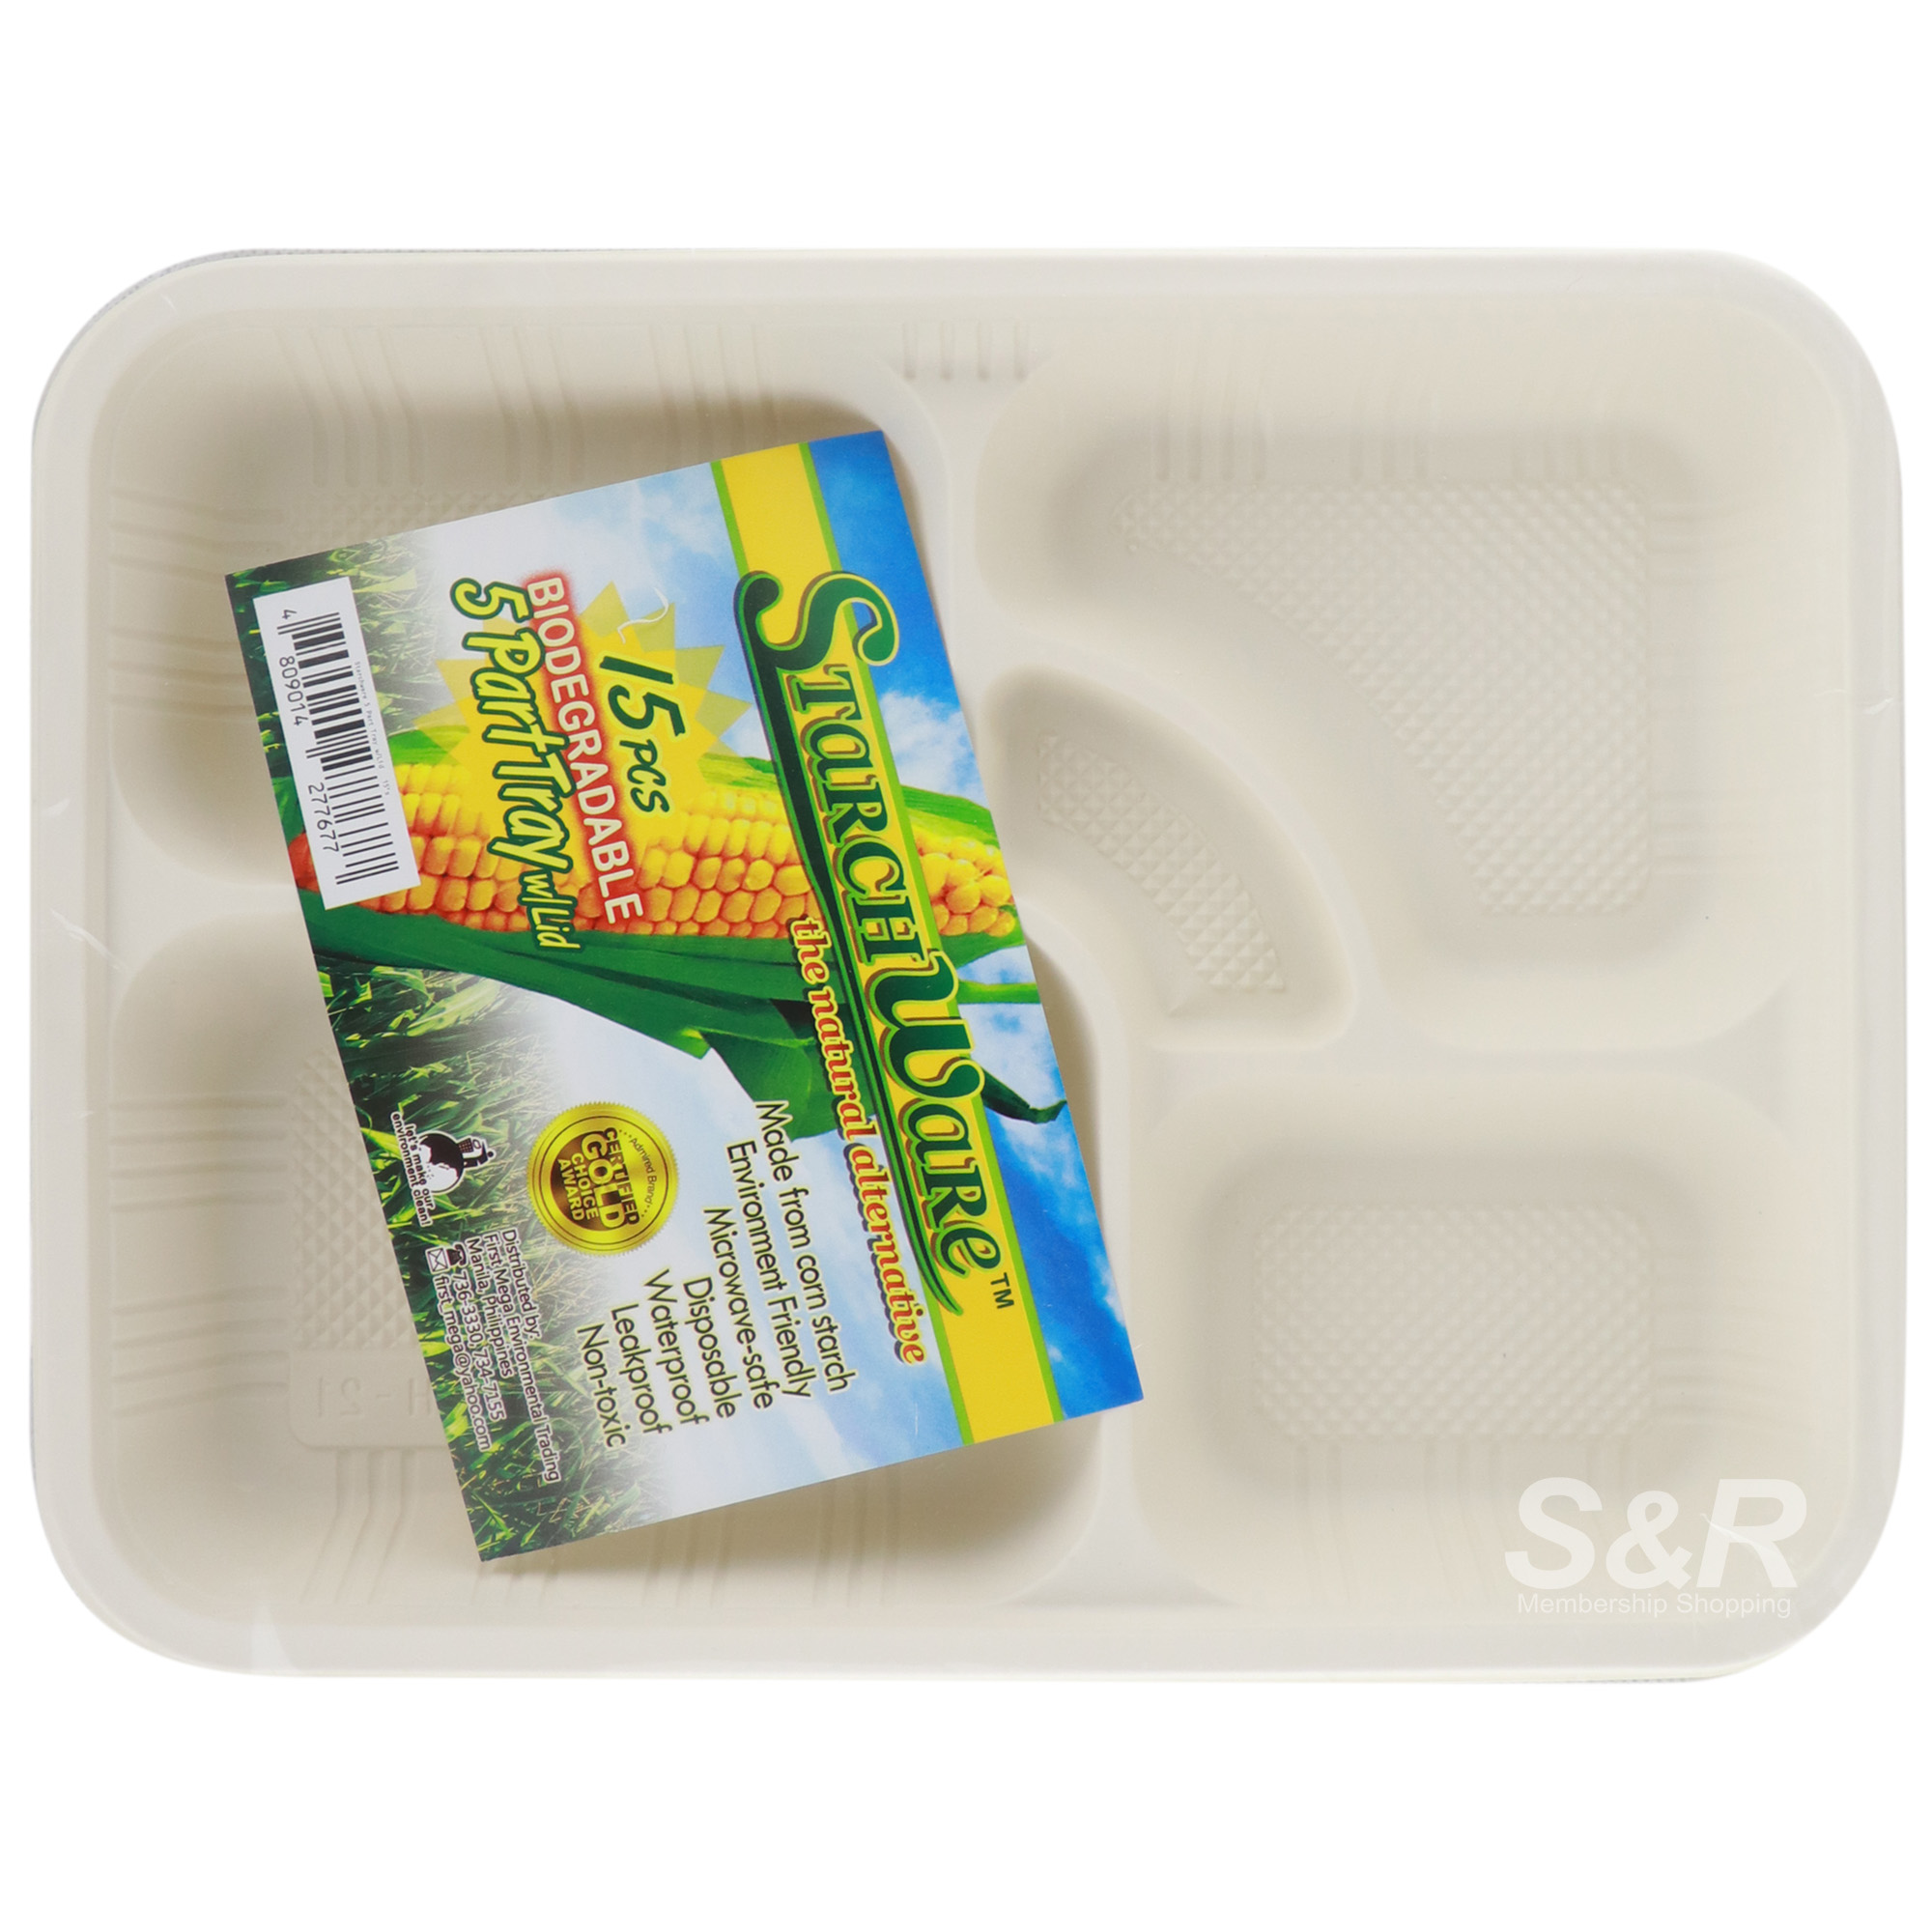 StarchWare Biodegradable 5 Part Tray with Lid 15pcs